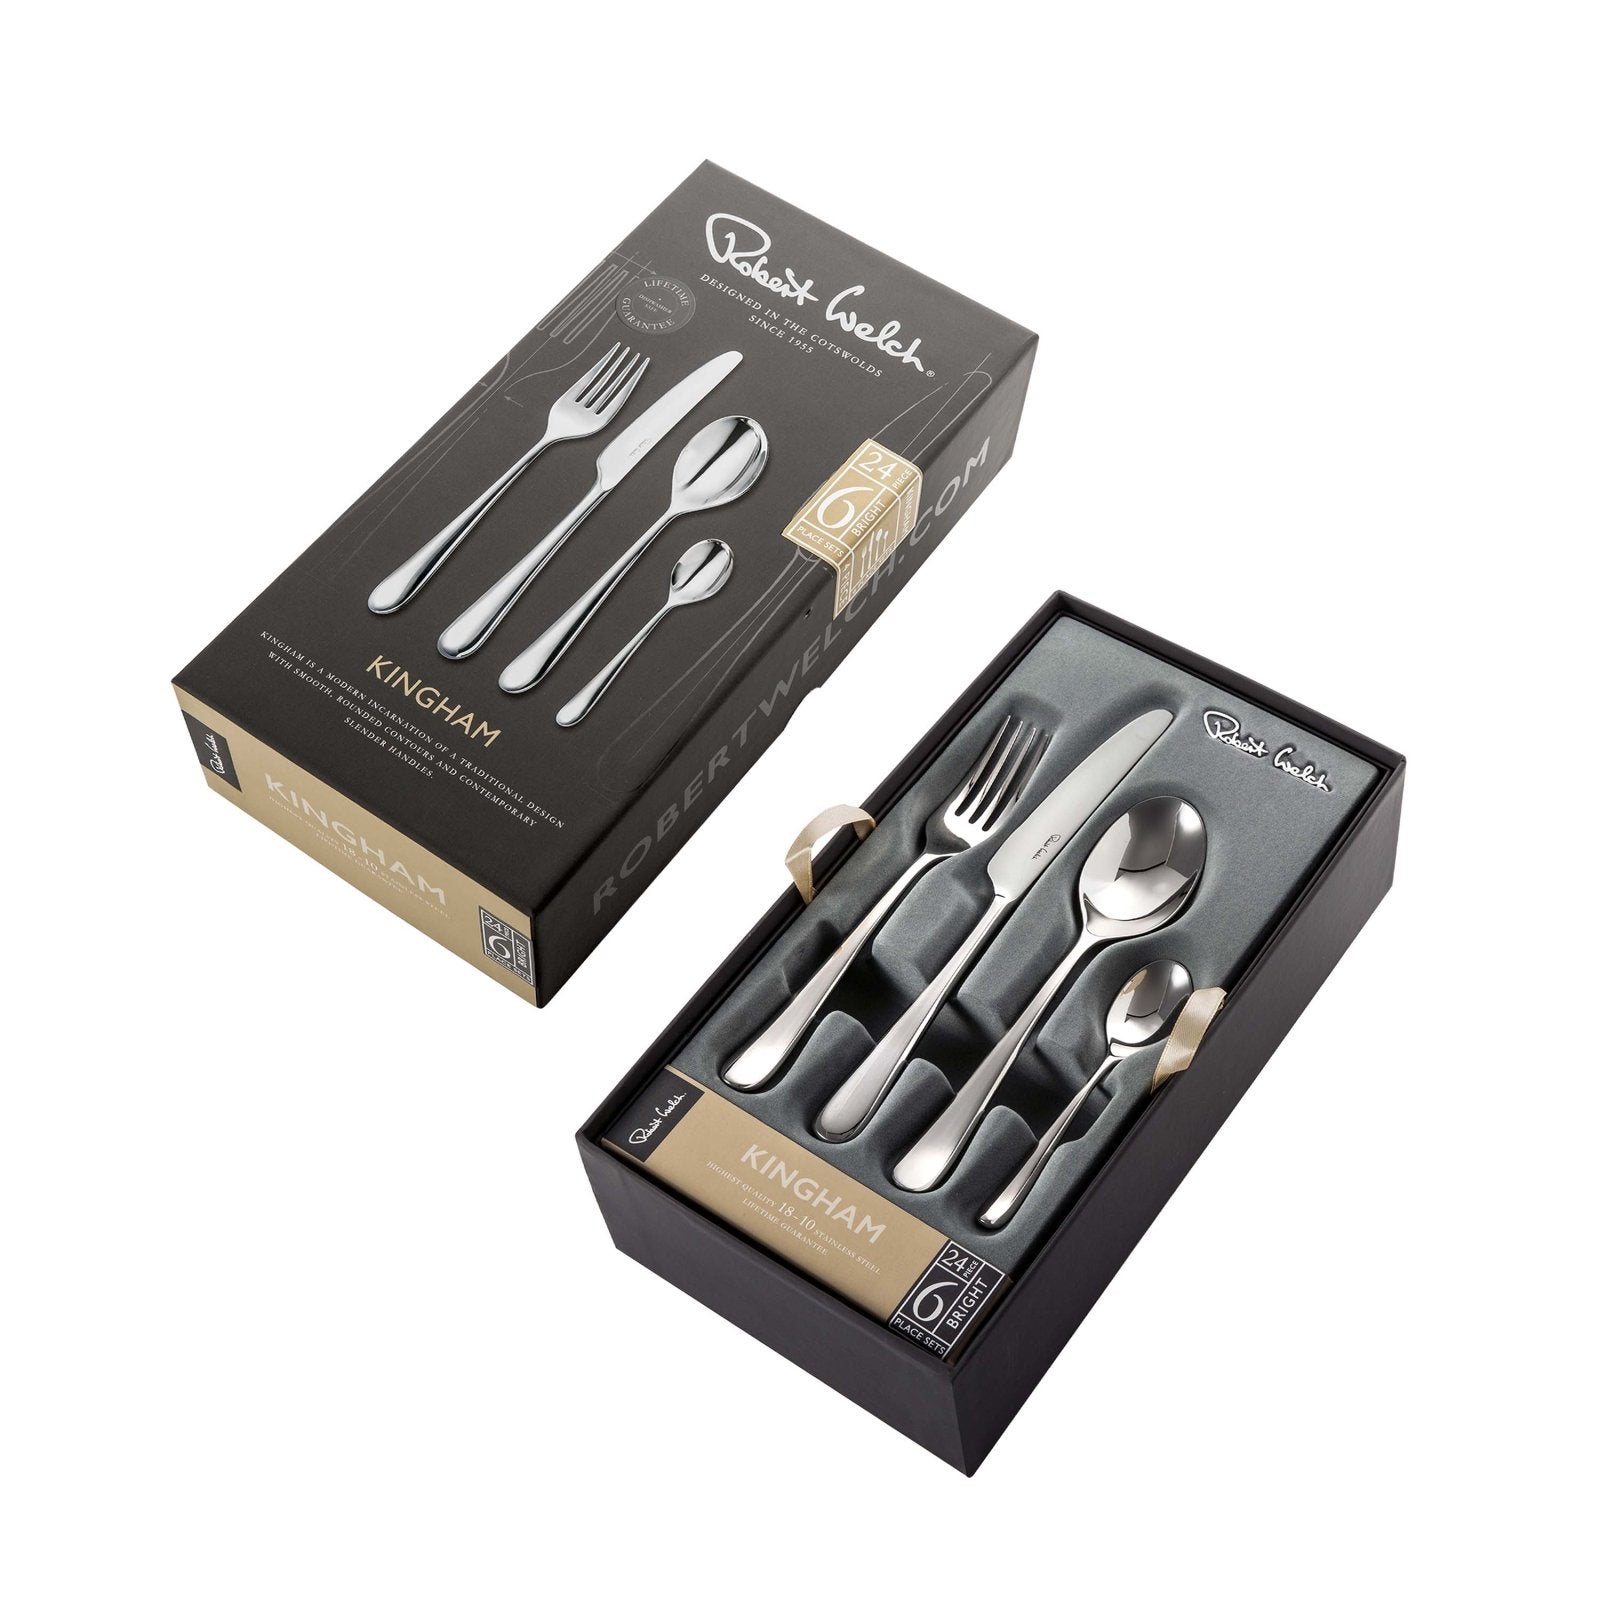 Robert Welch Stanton 24 Piece Set - STABR1099V/24 - The Cotswold Knife Company